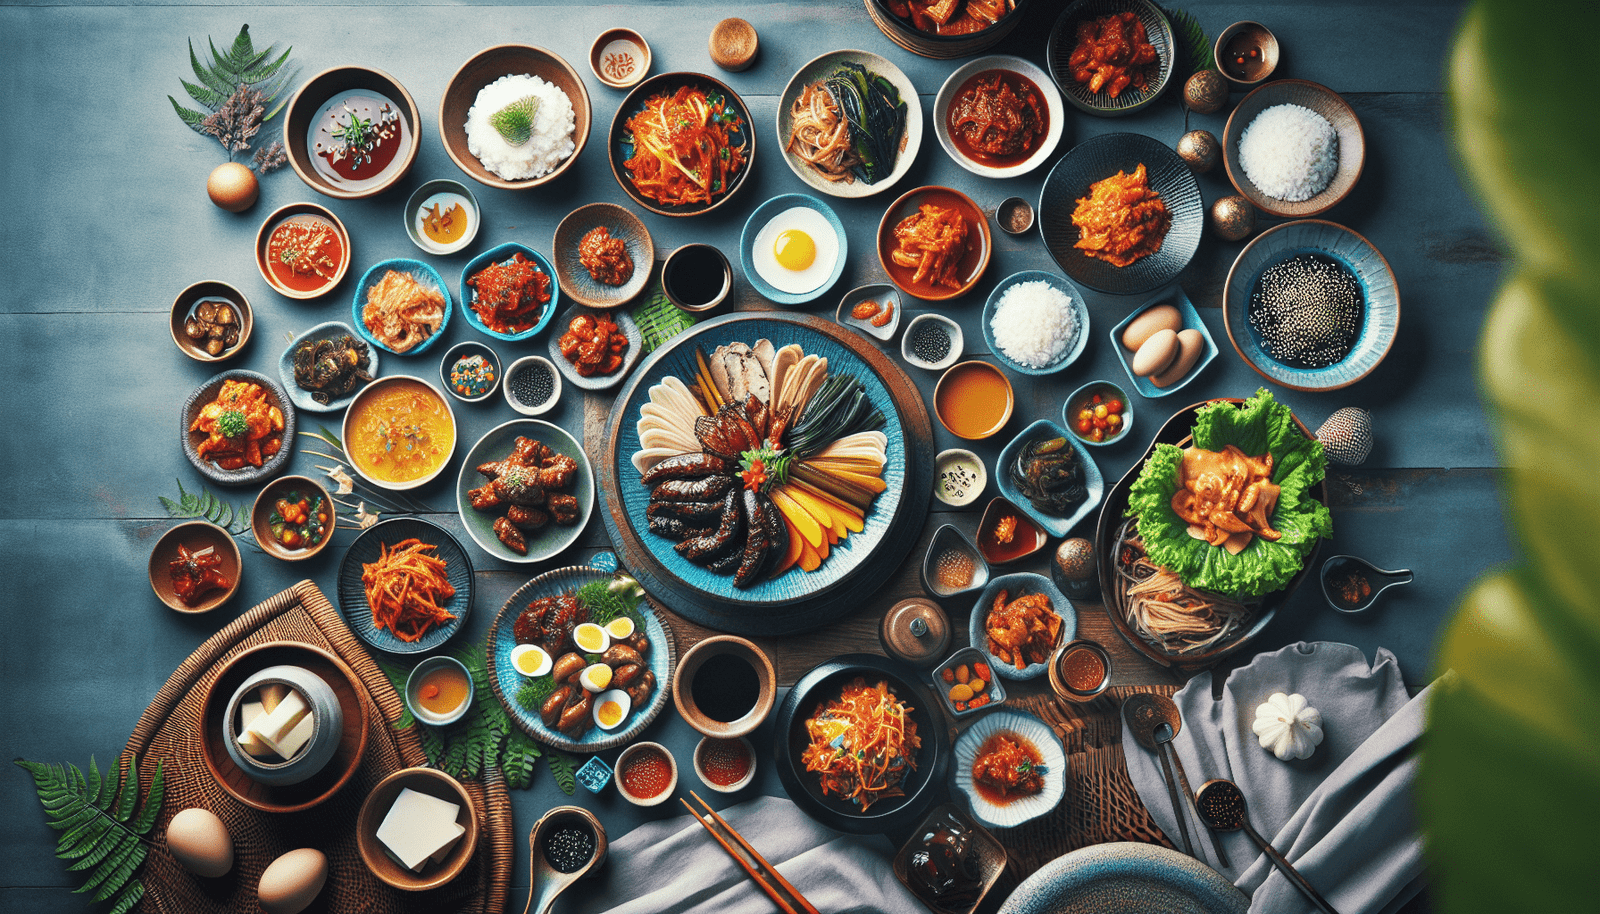 Can You Recommend Traditional Korean Dishes That Are Considered Festive Or Celebratory?